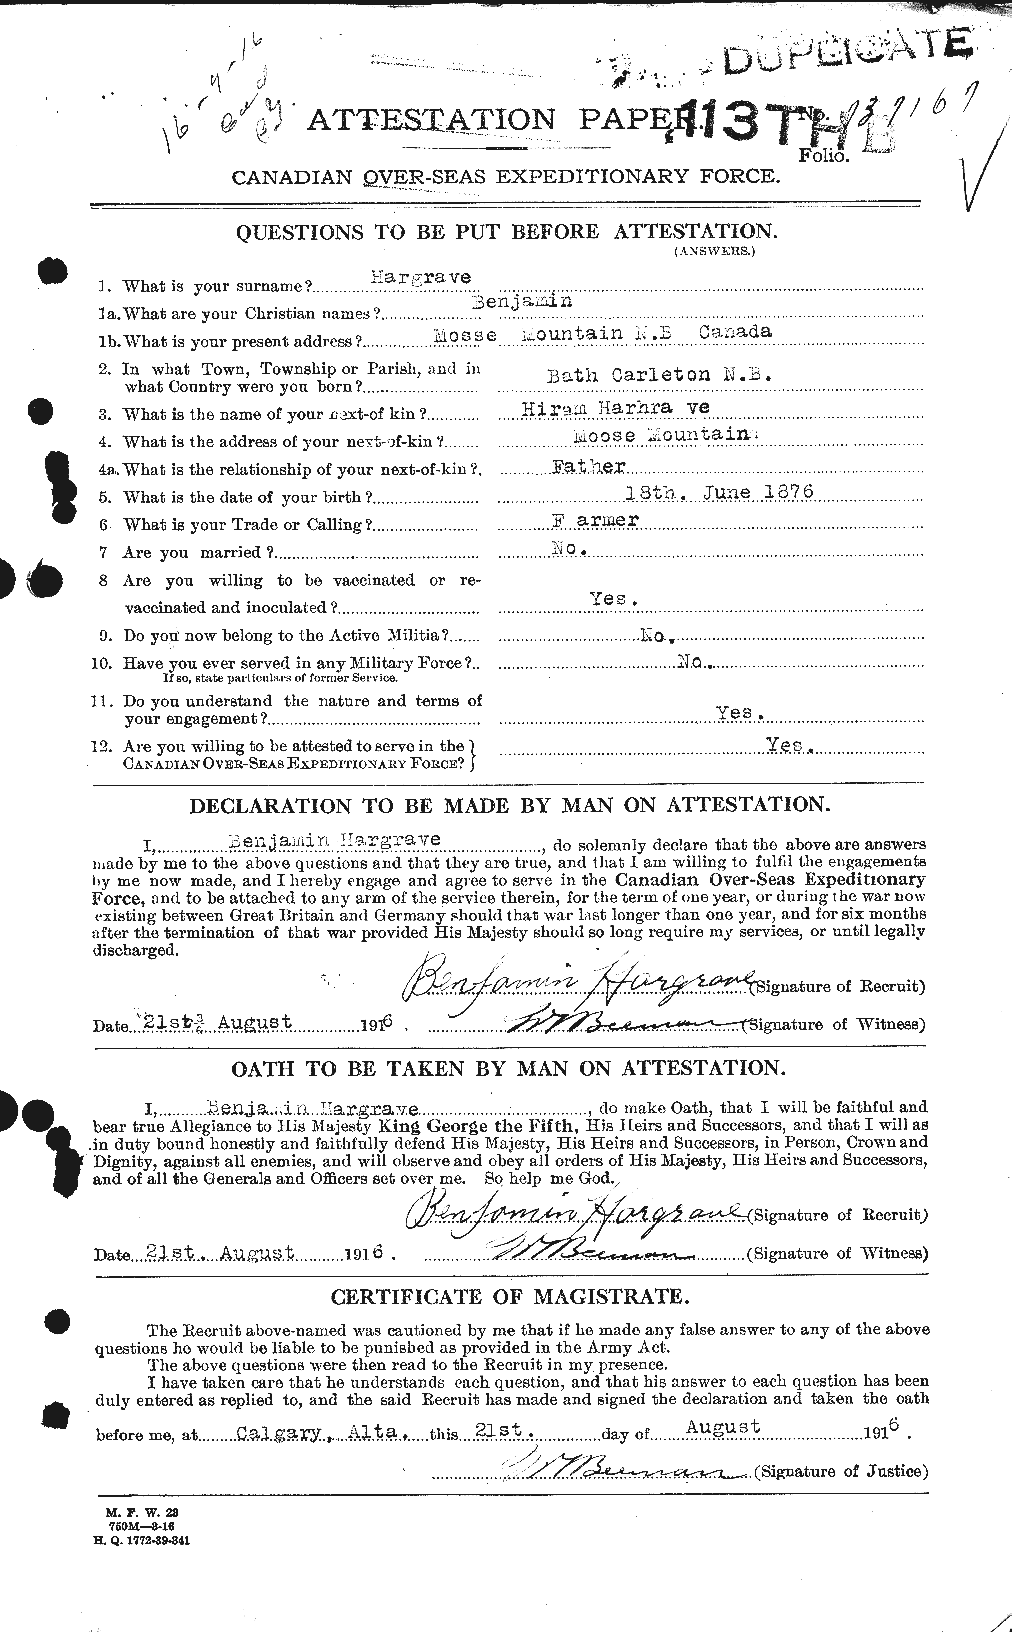 Personnel Records of the First World War - CEF 378024a